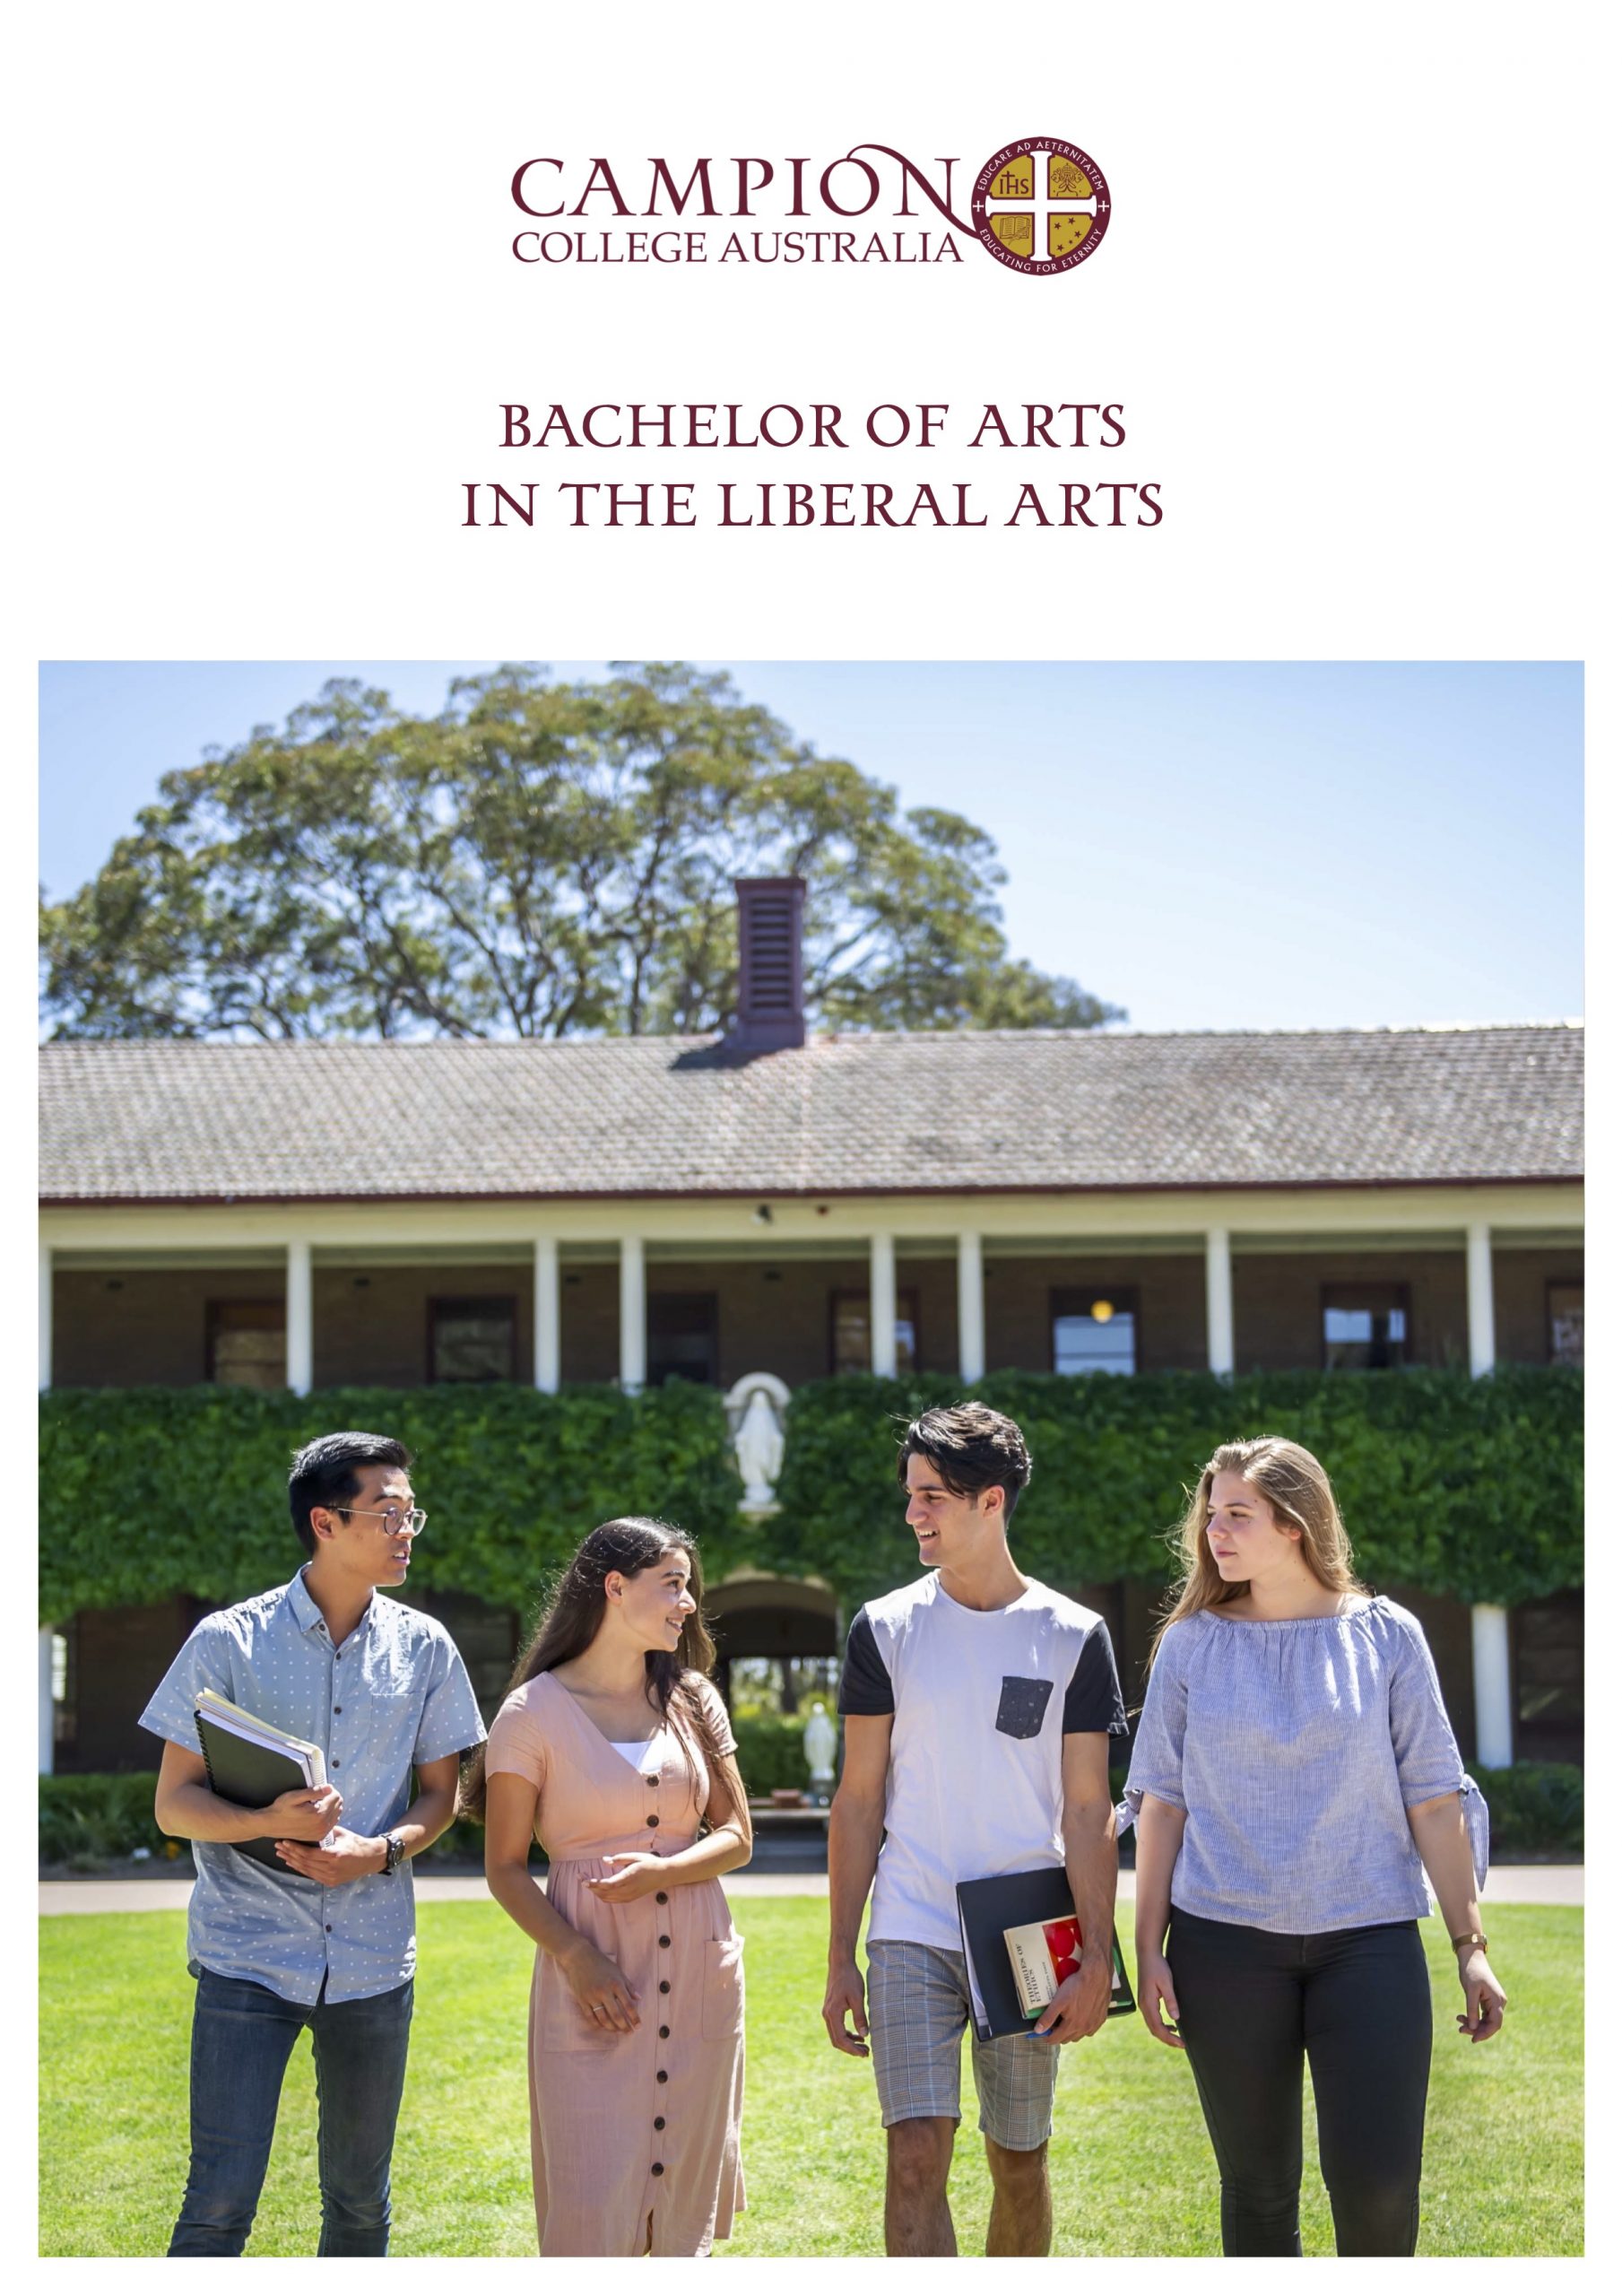 Bachelor-of-Arts-in-the-Liberal-Arts-Brochure-scaled. Campion College Australia.